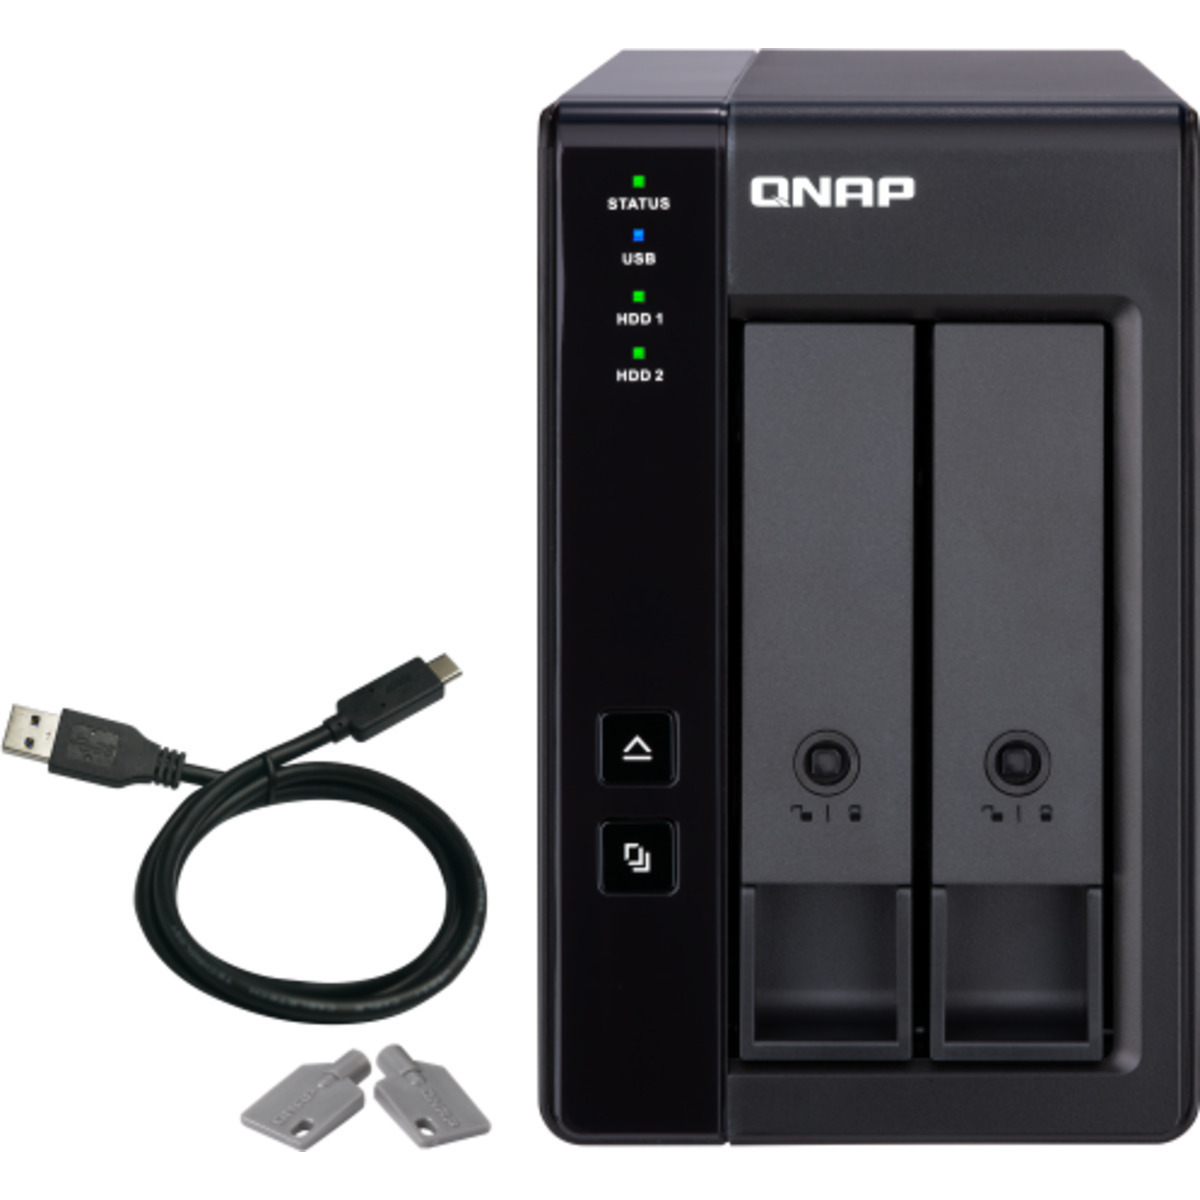 buy QNAP TR-002 External Expansion Drive 2tb Desktop Expansion Enclosure 2x1000gb Samsung 870 EVO MZ-77E1T0BAM 2.5 560/530MB/s SATA 6Gb/s SSD CONSUMER Class Drives Installed - Burn-In Tested - nas headquarters buy network attached storage server device das new raid-5 free shipping simply usa TR-002 External Expansion Drive